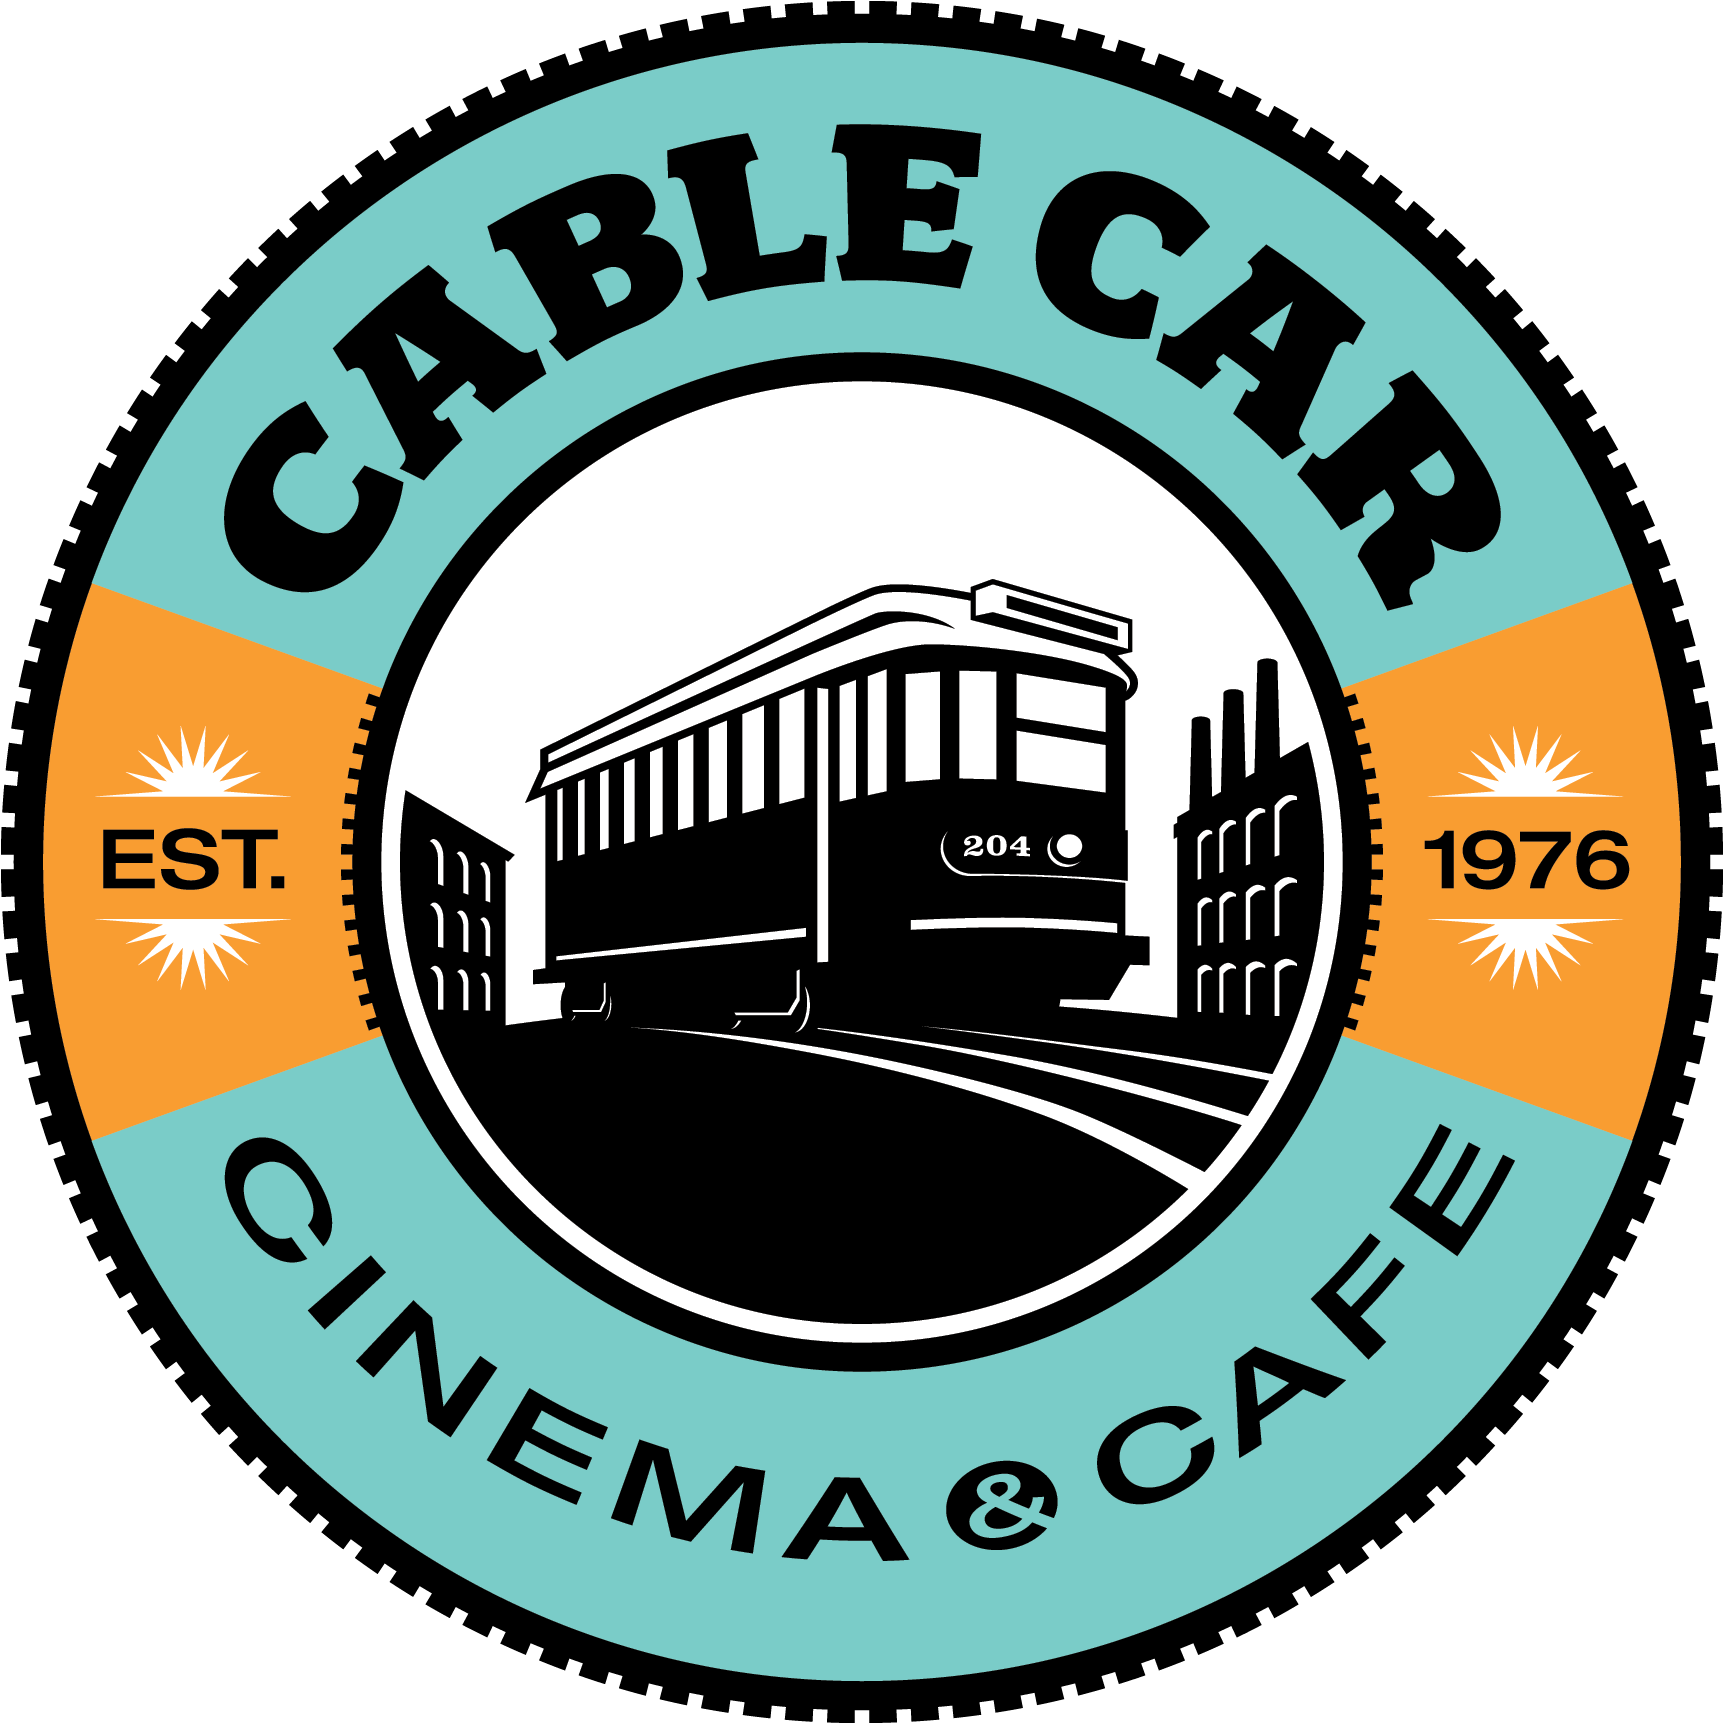 Graphic Design Movie Posters For Kids - Cable Car Cinema Cafe (1800x1800)